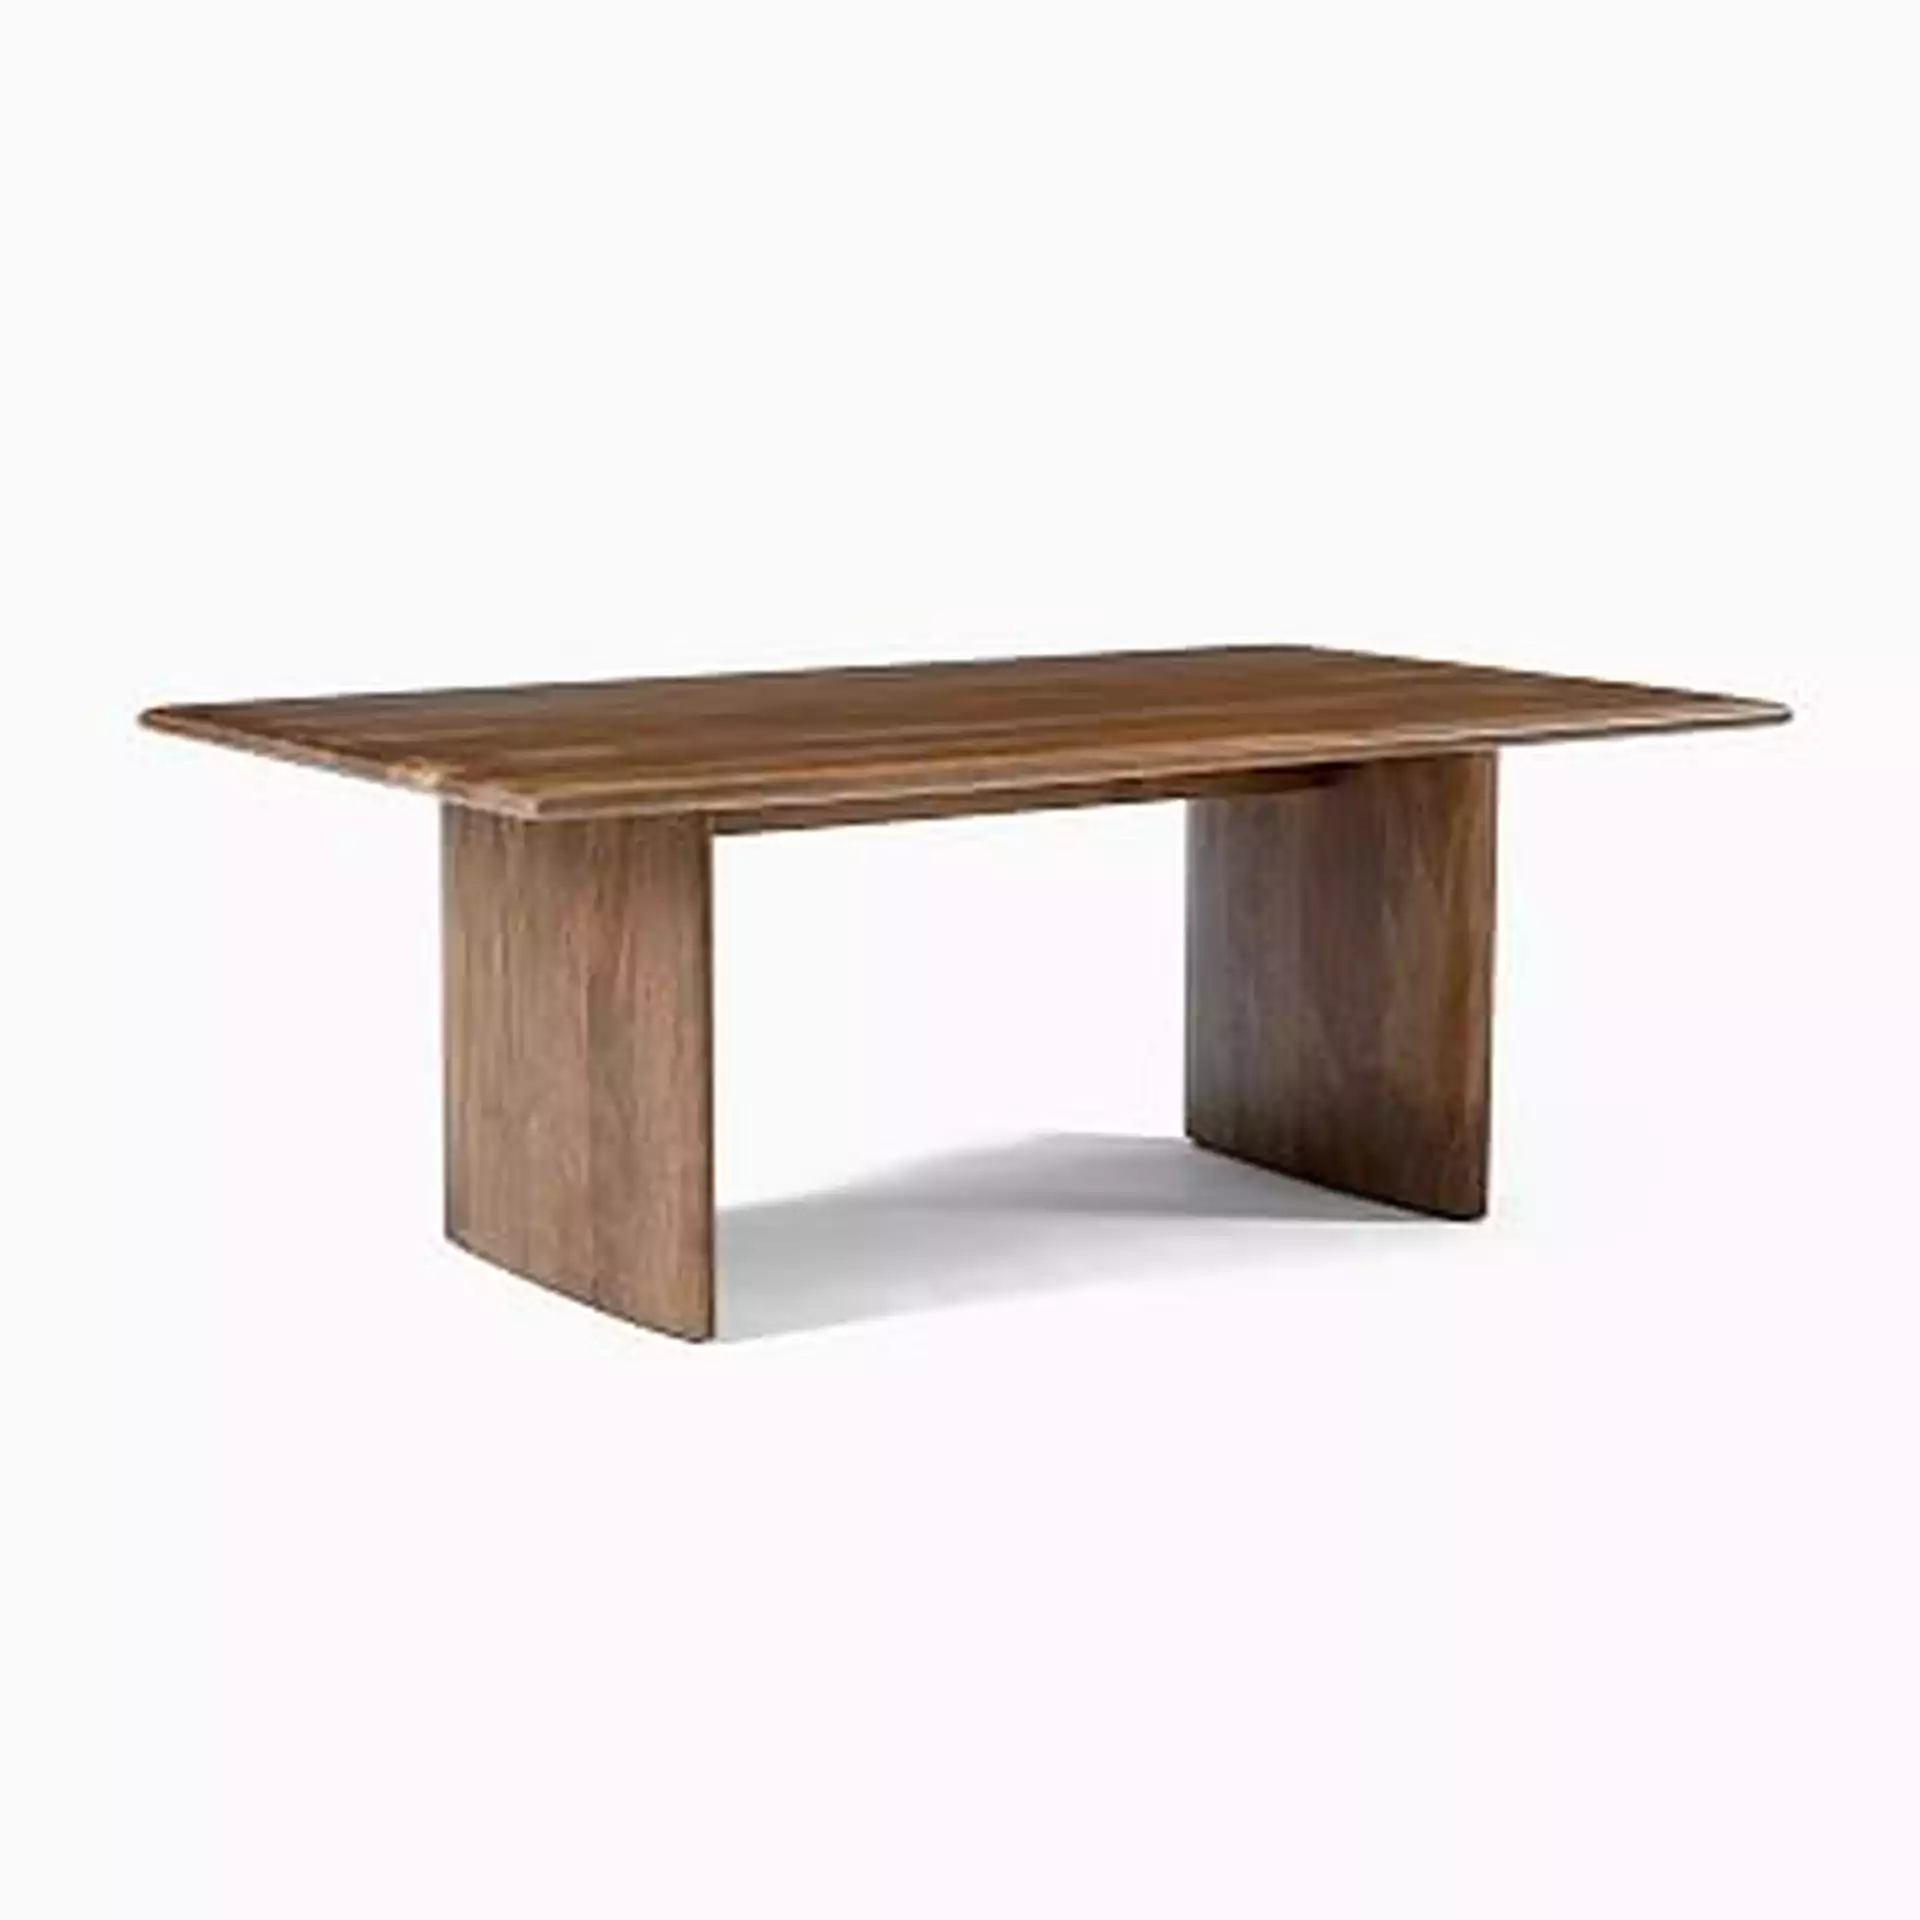 WE Anton Collection 44 Inch Black Coffee Table